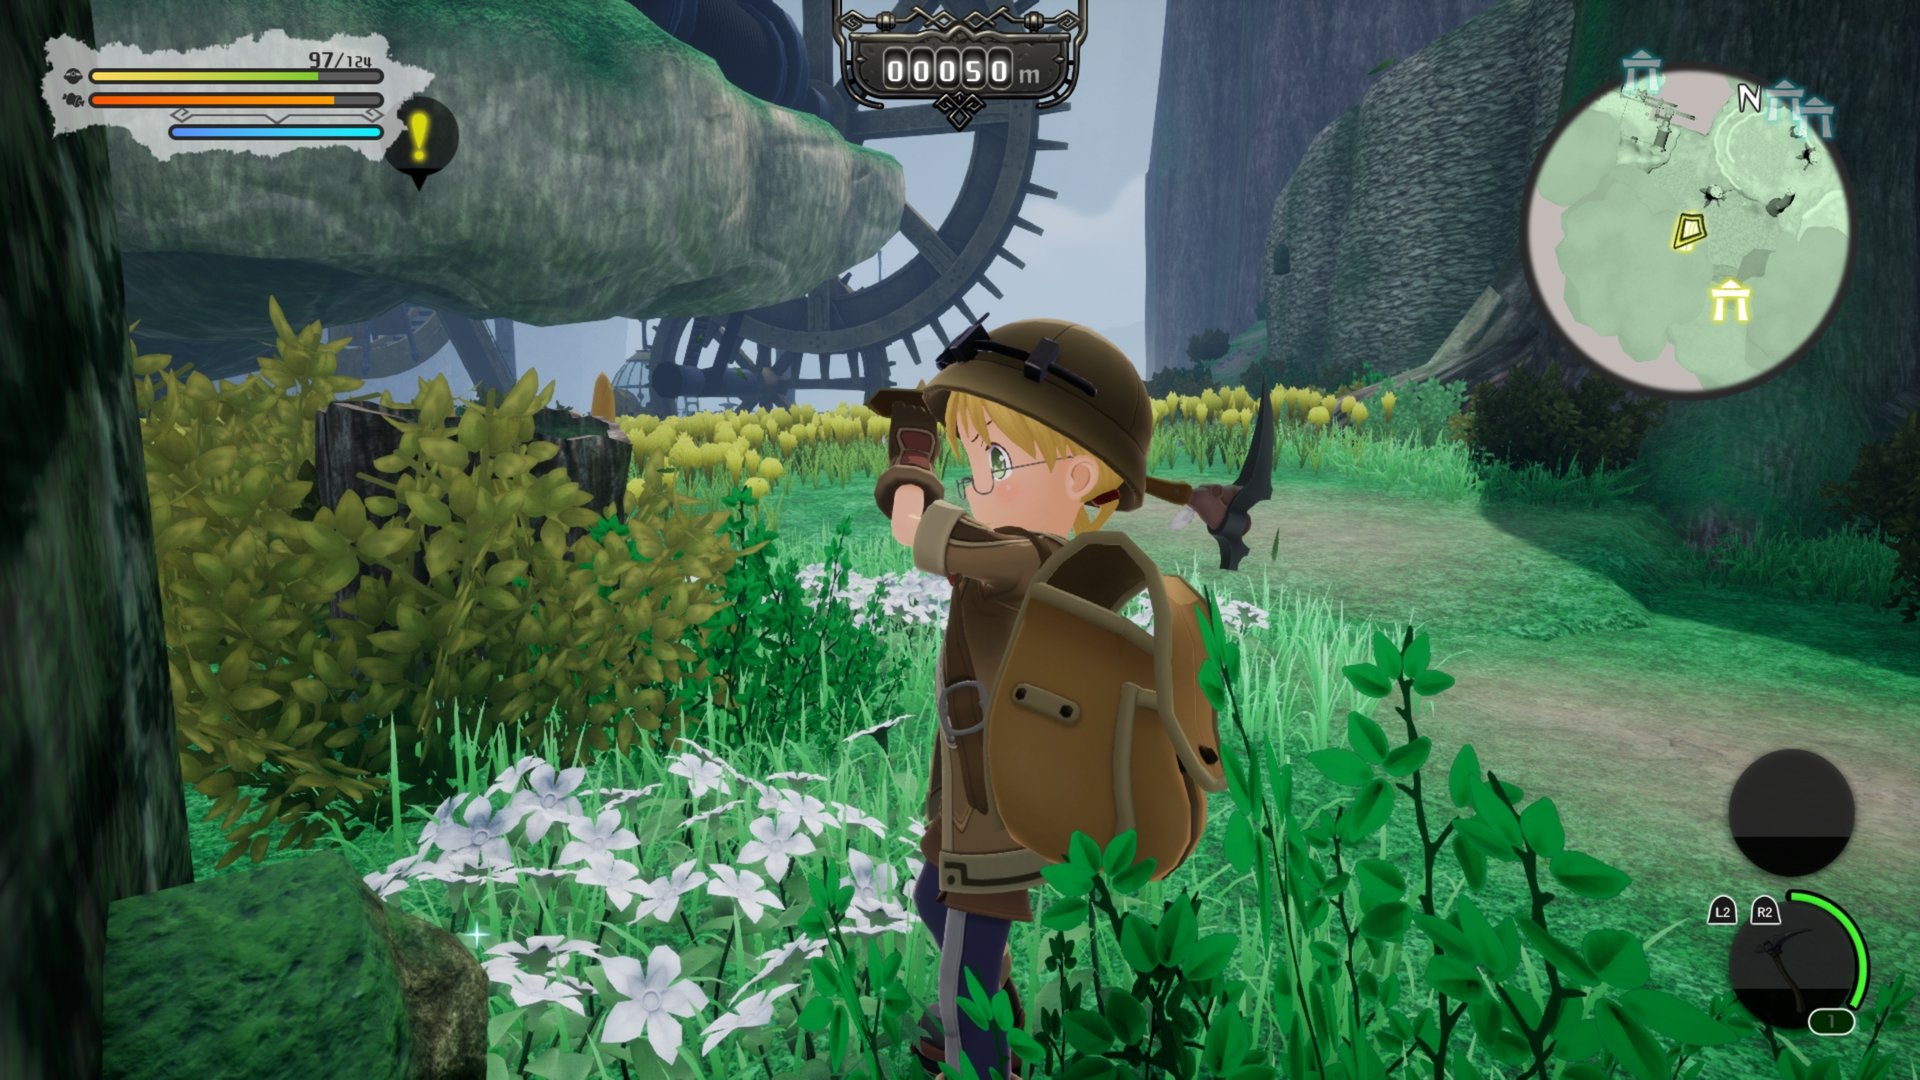 Made in Abyss: Binary Star Falling into Darkness Review (PS4) - Let's Get  Deep - Finger Guns